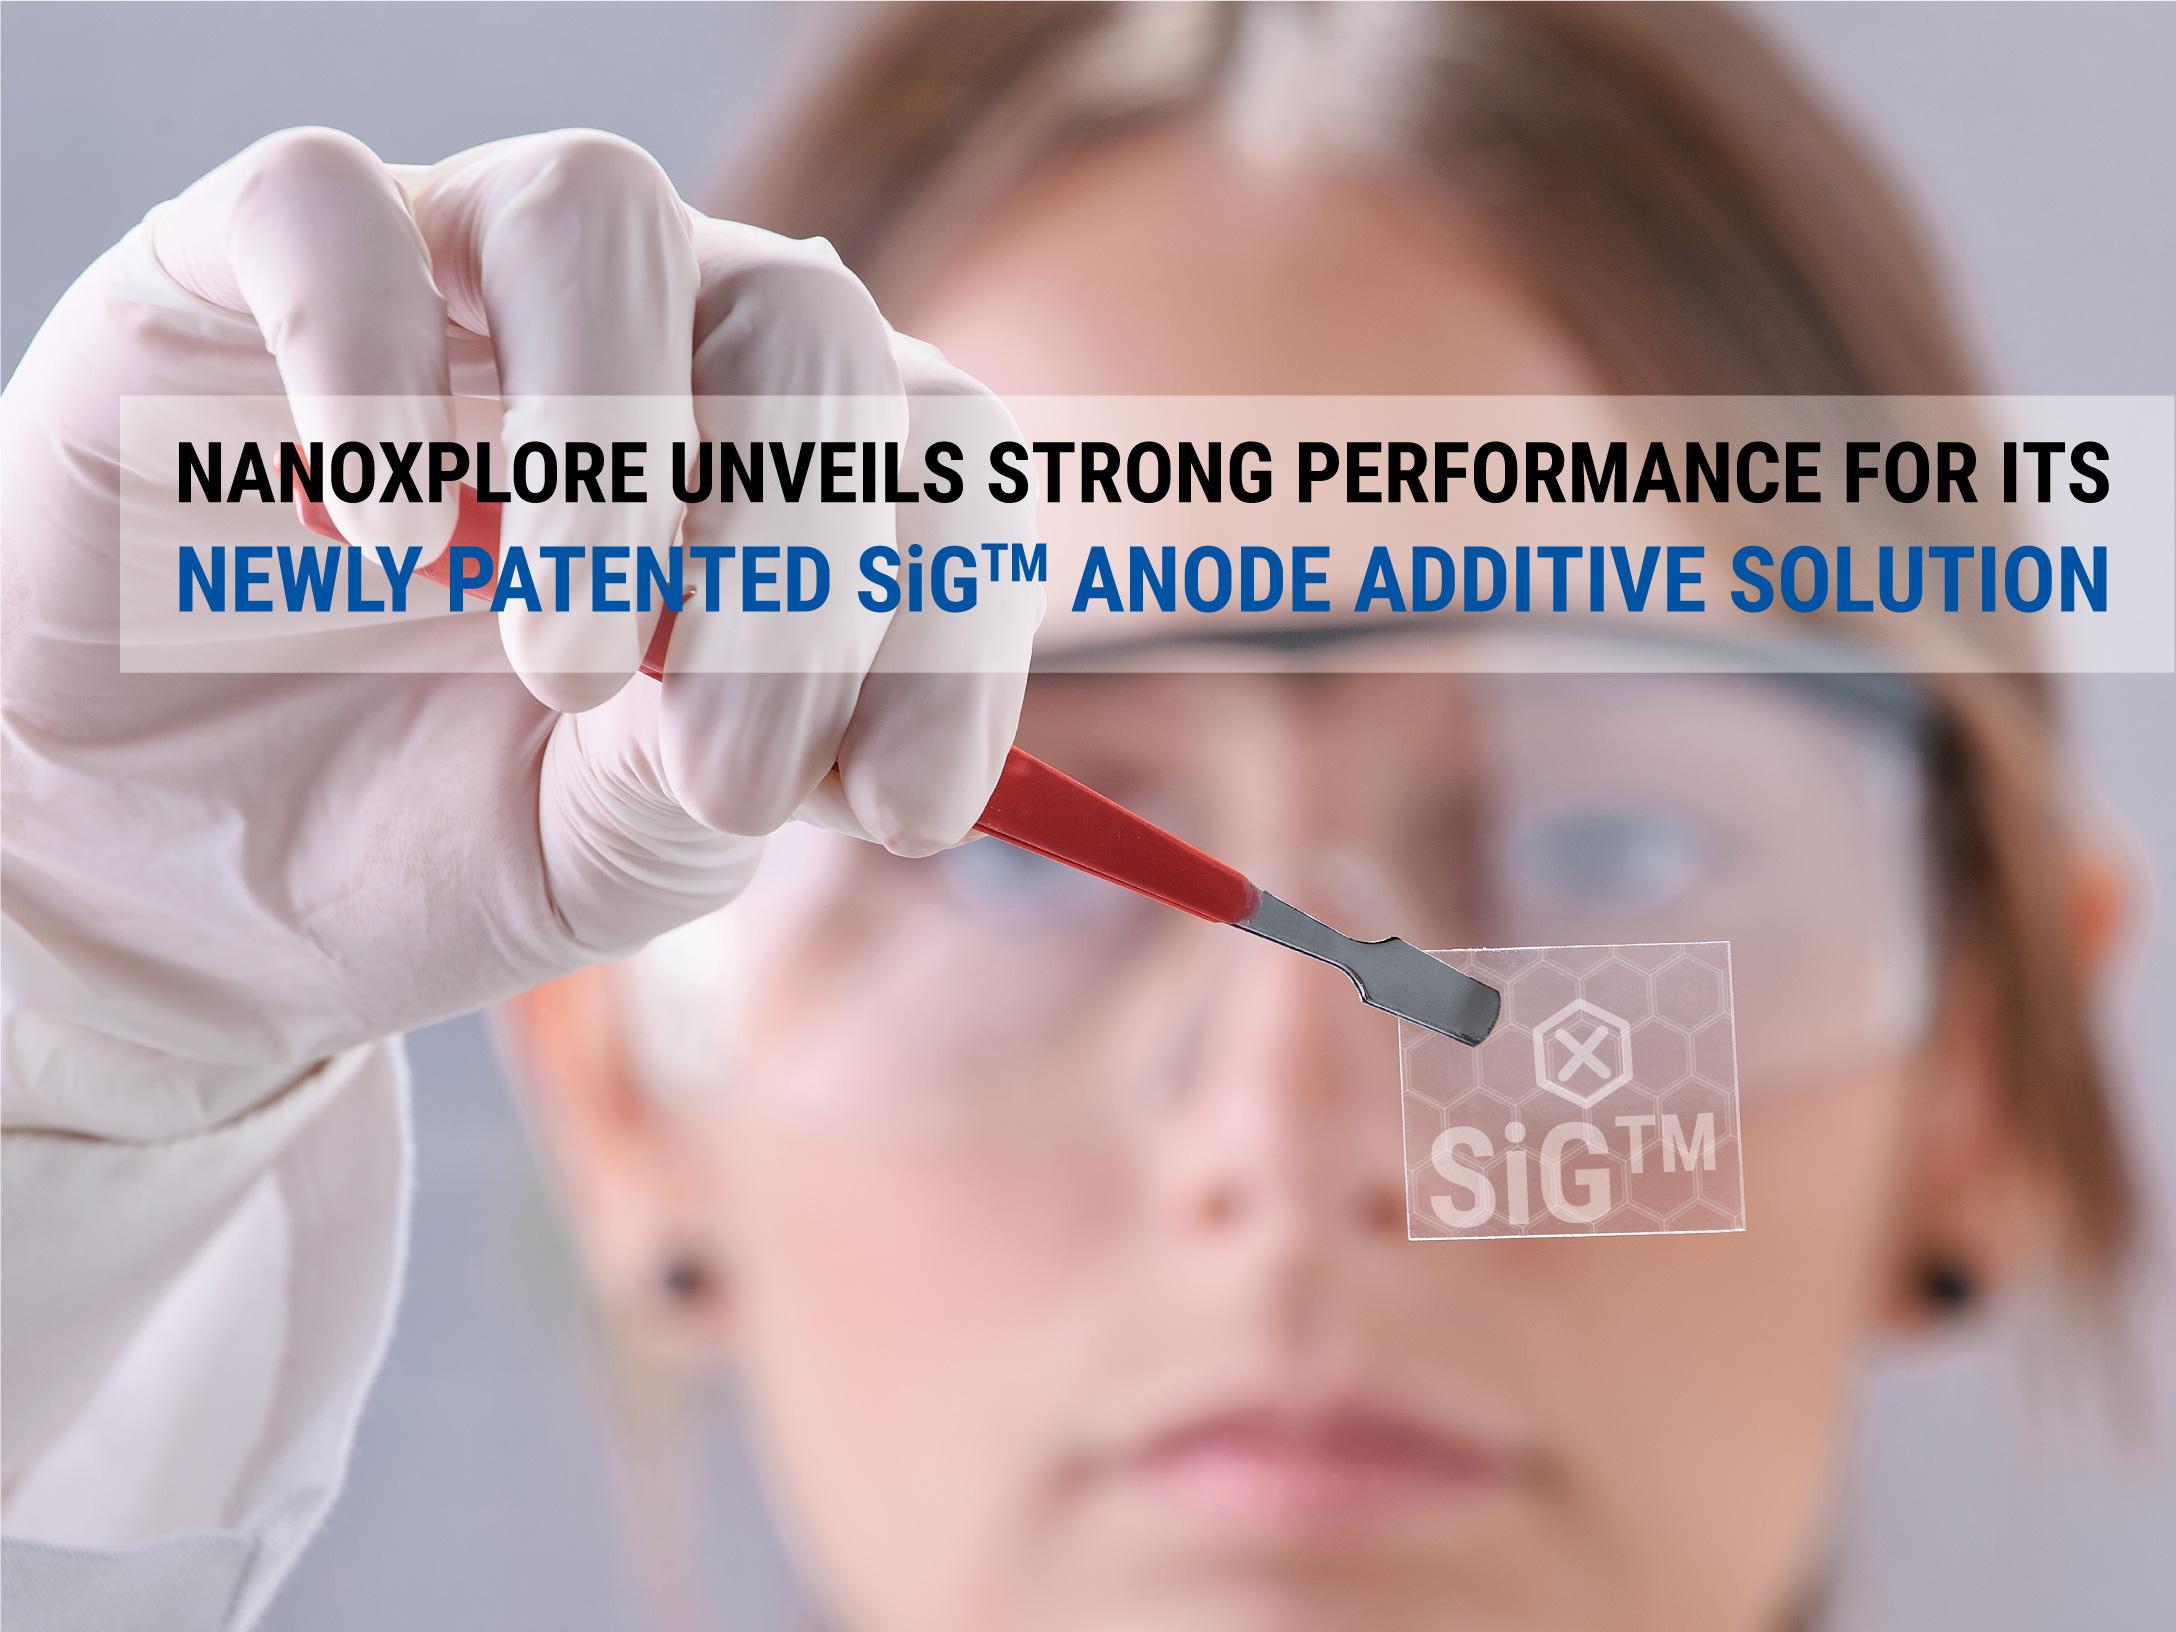 Product NANOXPLORE UNVEILS STRONG PERFORMANCE FOR ITS NEWLY PATENTED SiG™ ANODE ADDITIVE SOLUTION - Nanoxplore image